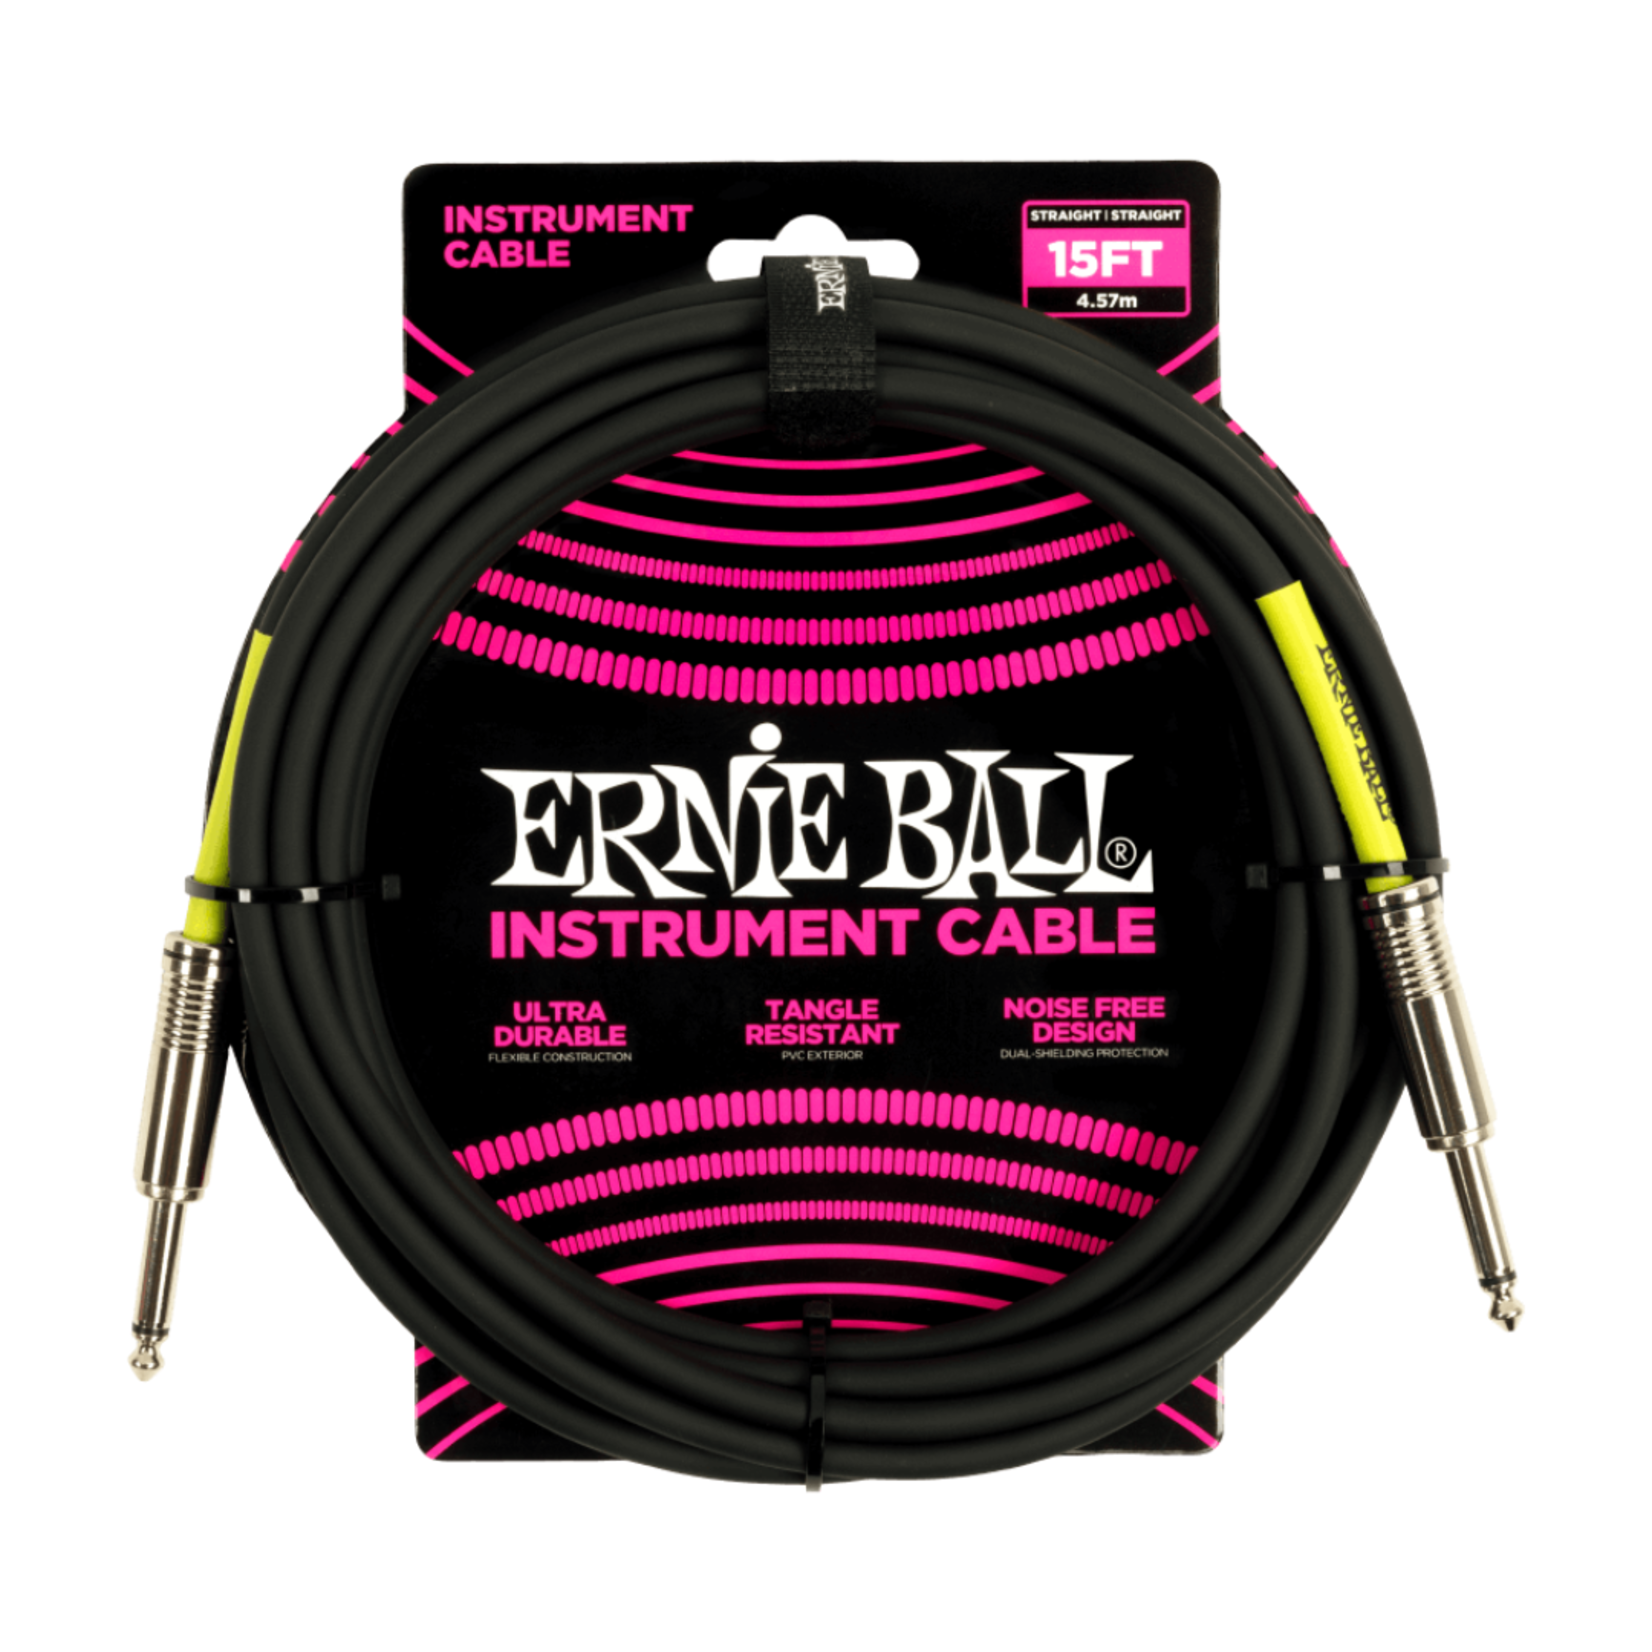 Ernie Ball Classic Instrument Cable Straight/Straight 15ft - Black